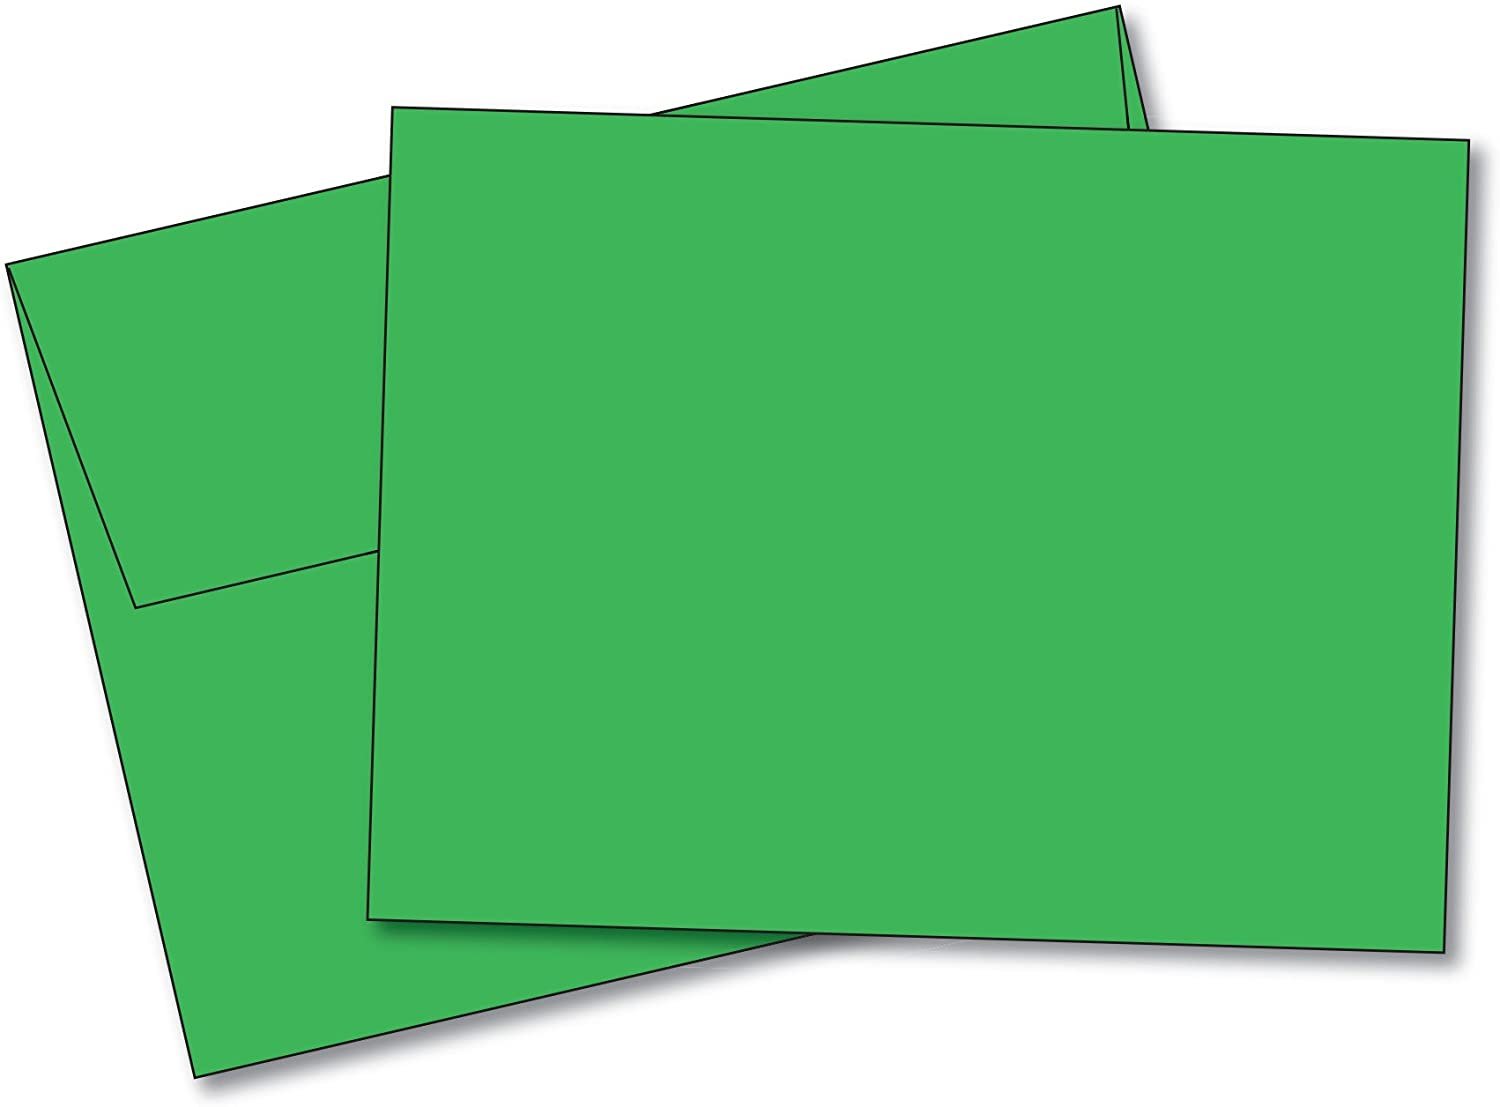 Blank Color Note Cards Uncoated, 4 1/2 X 6 Inches Cards - 40 Cards and Envelopes - (These Are NOT Fold Over Cards) (Green) - image 1 of 1